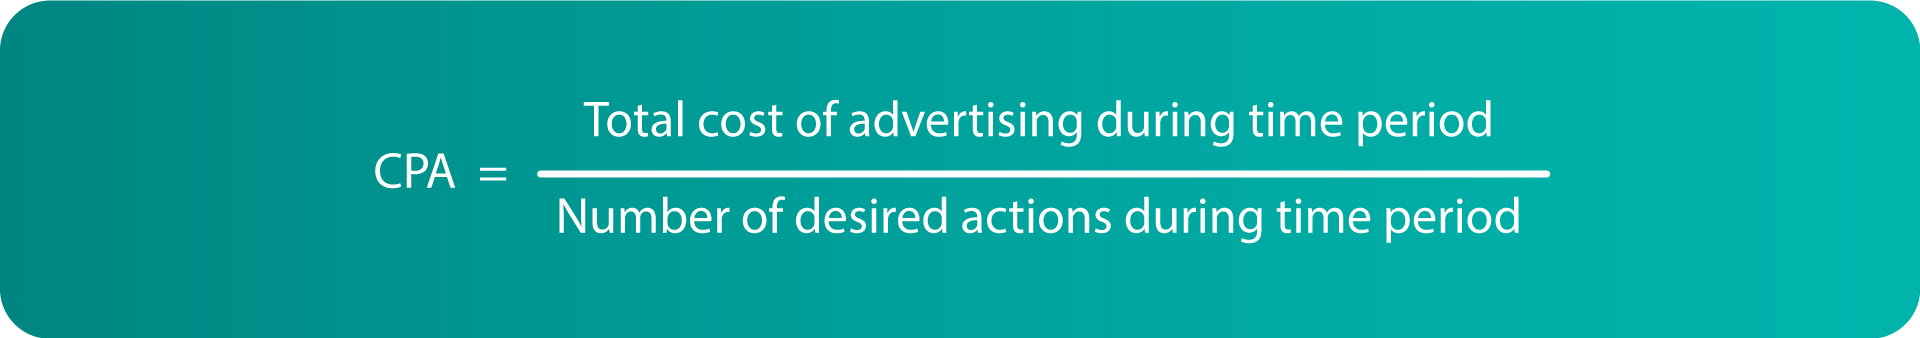 CPA= Total cost of advertising during time period/ number of desired actions during the time period